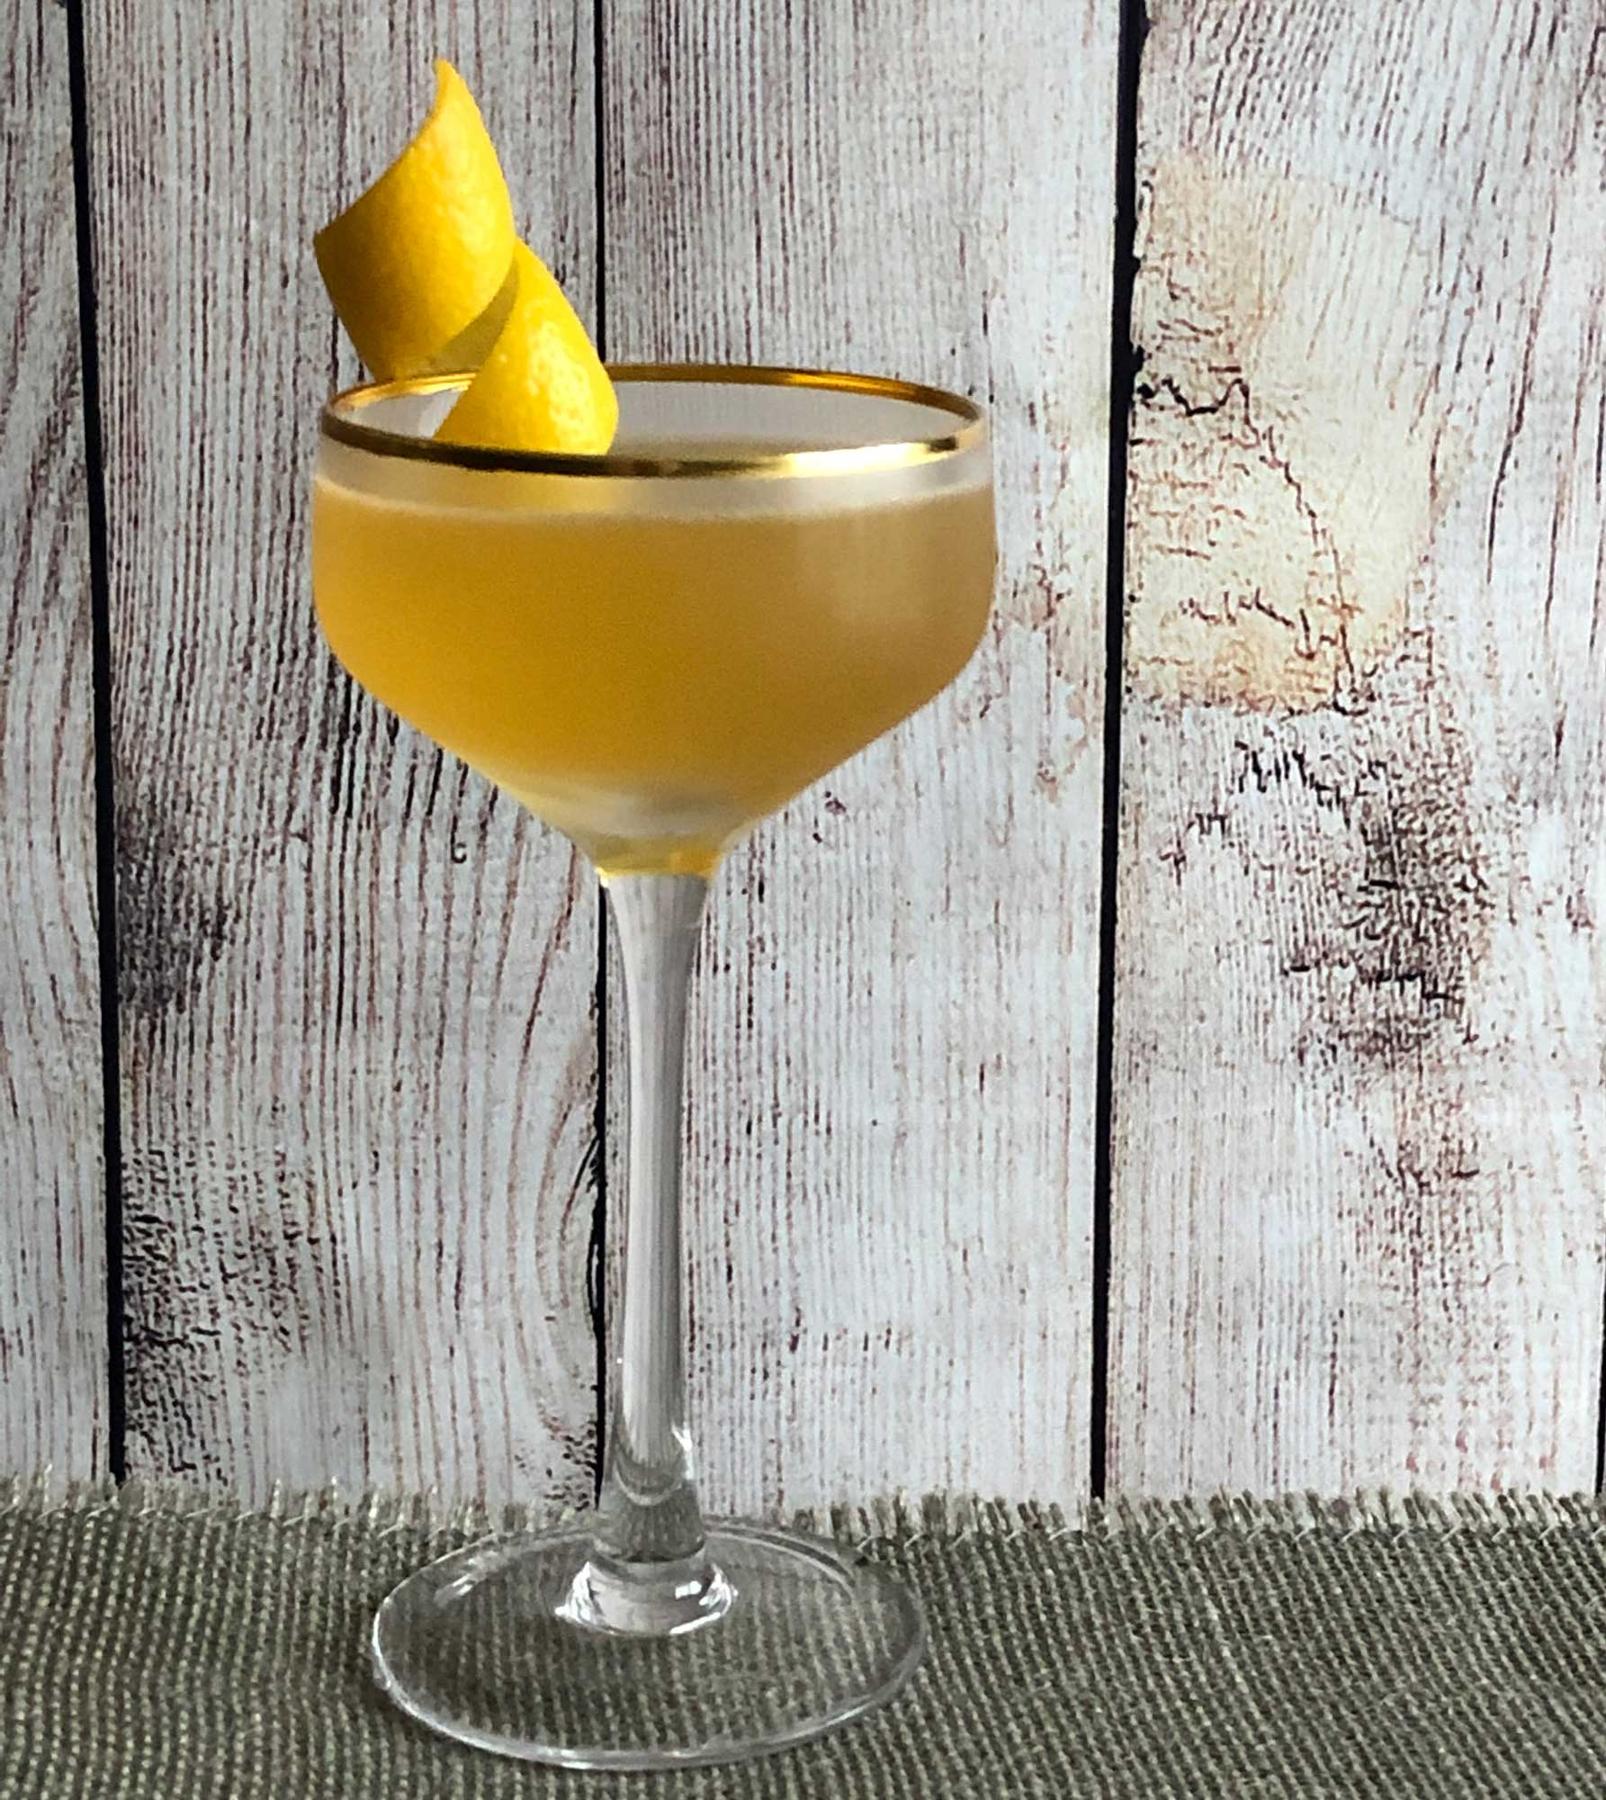 An example of the Havana Cocktail, the mixed drink (drink) featuring Blume Marillen Apricot Eau-de-Vie, KRONAN Swedish Punsch, Hayman’s Royal Dock Navy Strength Gin, lemon juice, simple syrup, and lemon twist; photo by Lee Edwards